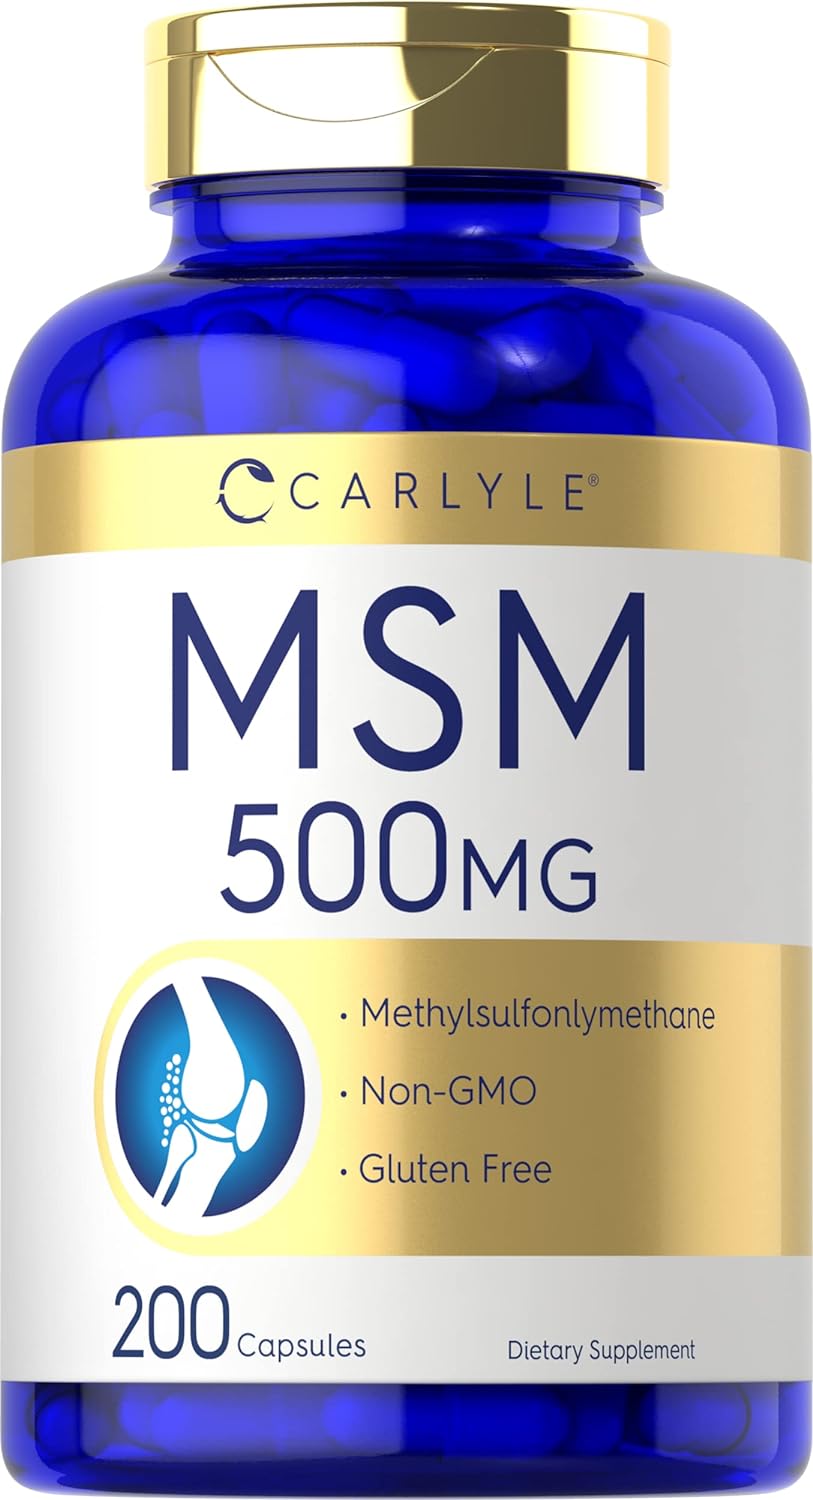 Carlyle MSM Supplement | 500mg | 200 Capsules | Non-GMO, and Gluten Fr